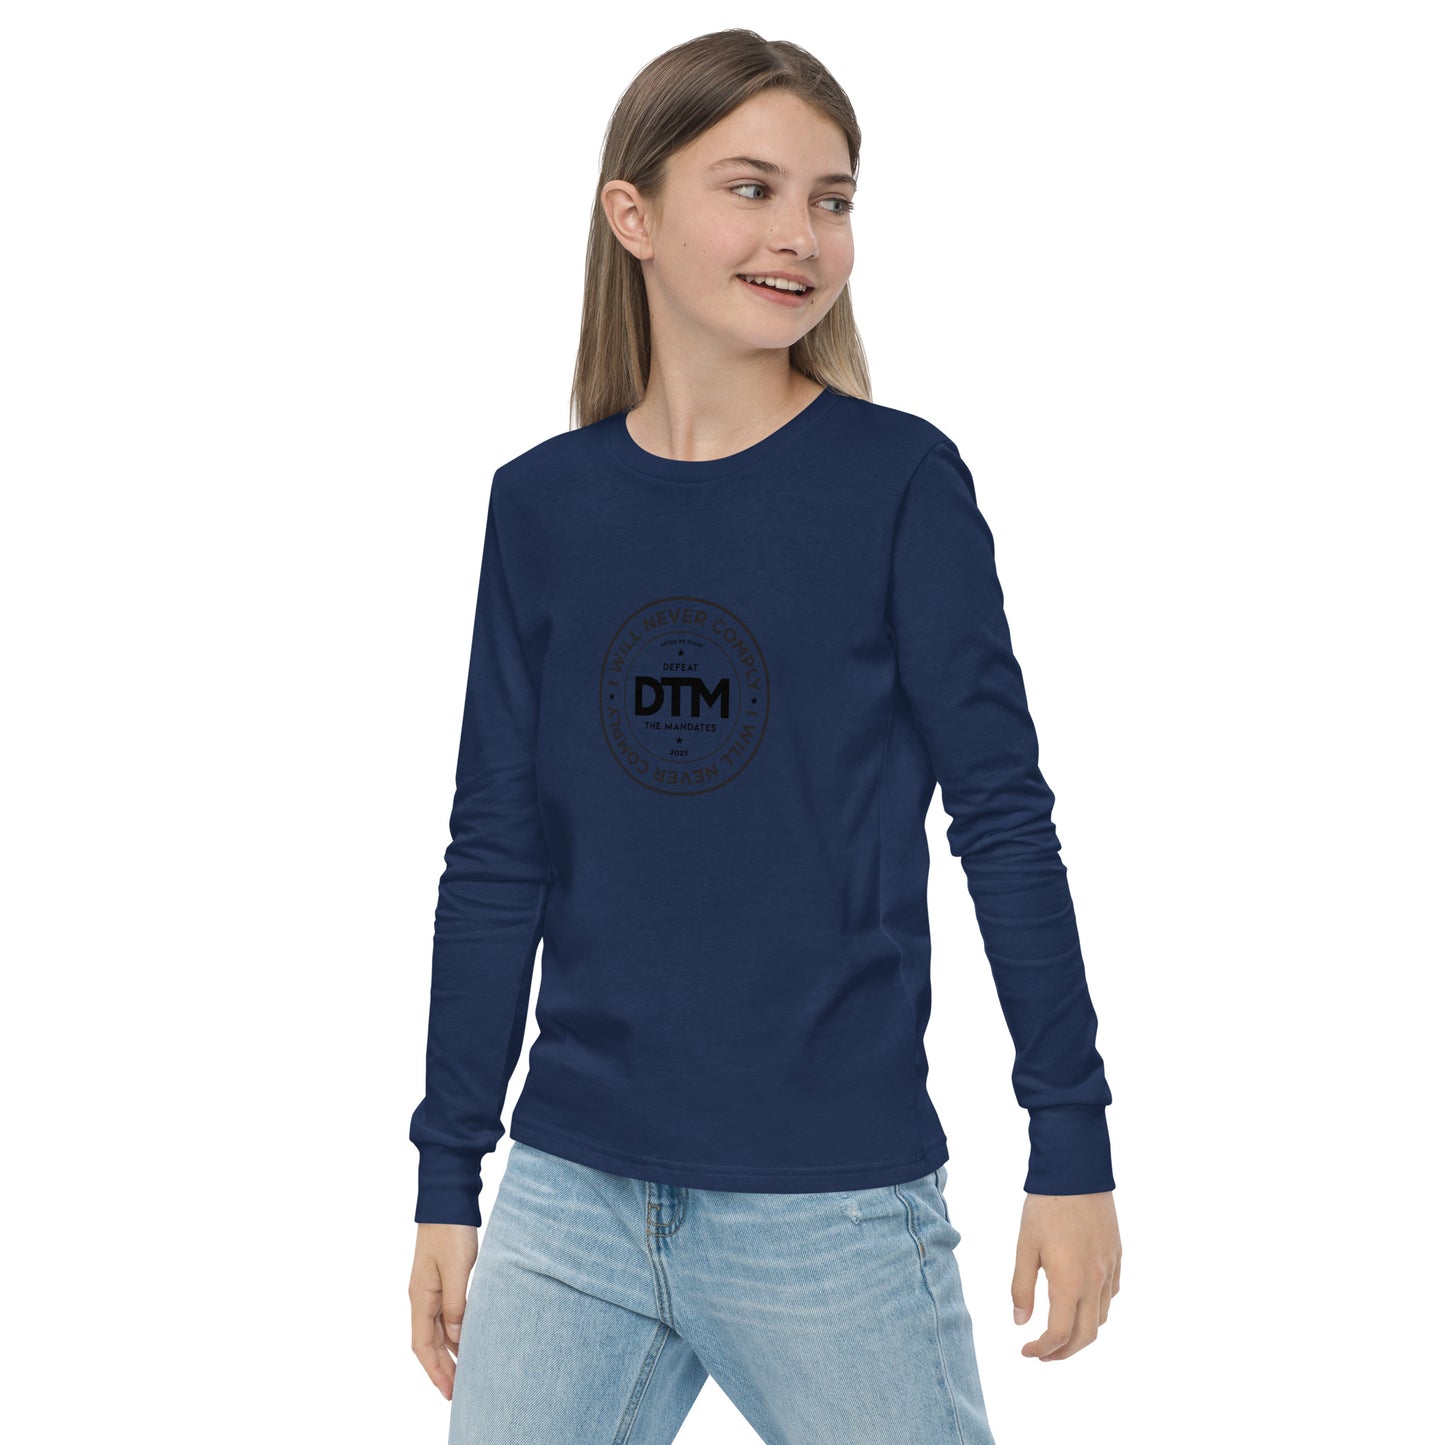 NEVER COMPLY Youth long sleeve tee